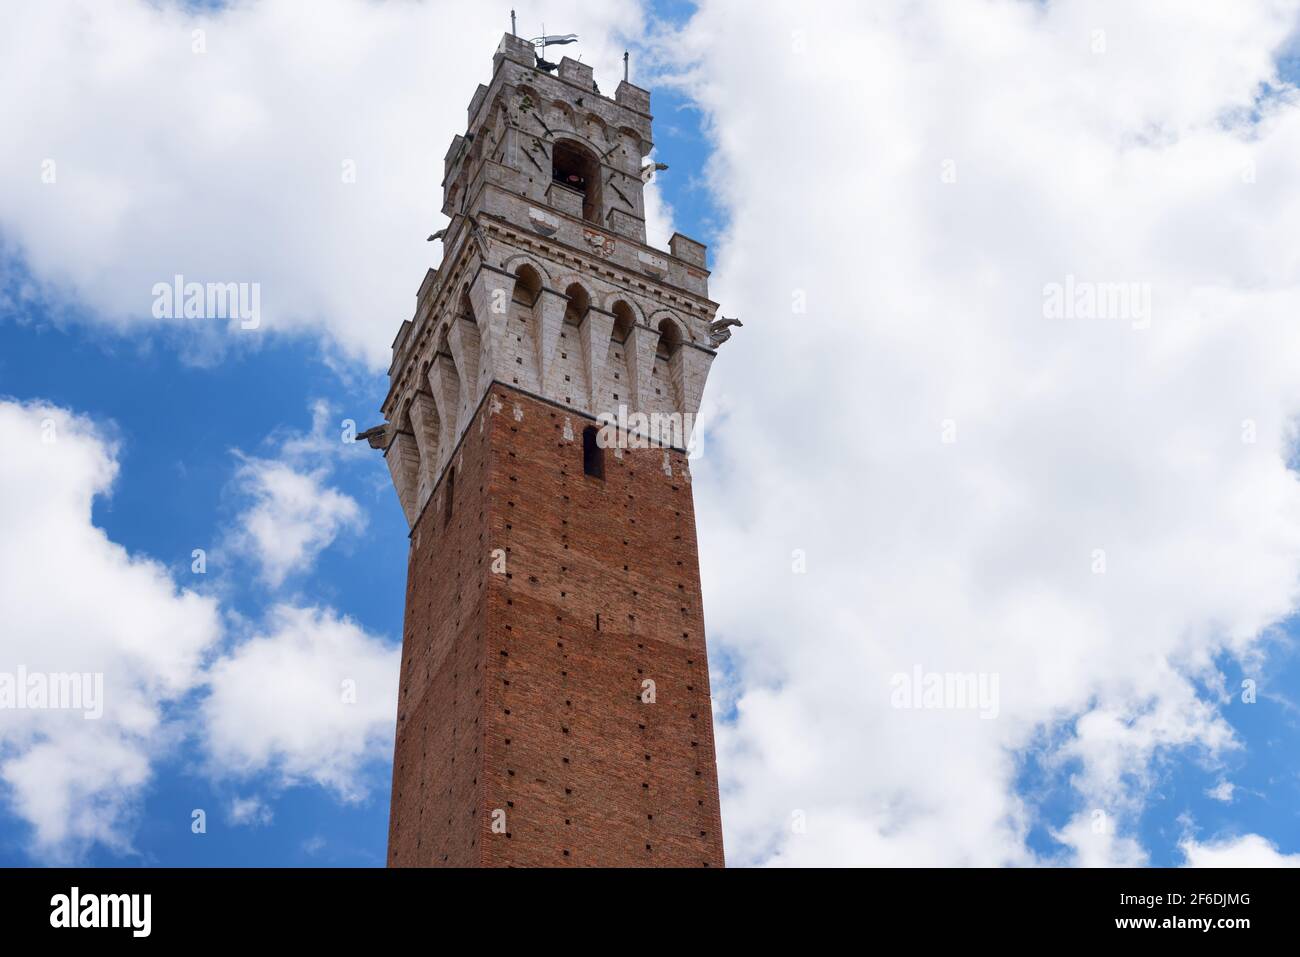 Detail of the Torre del Mangia 87 m. Tower of Mangia on blue sky with clouds. Siena, Italy Stock Photo